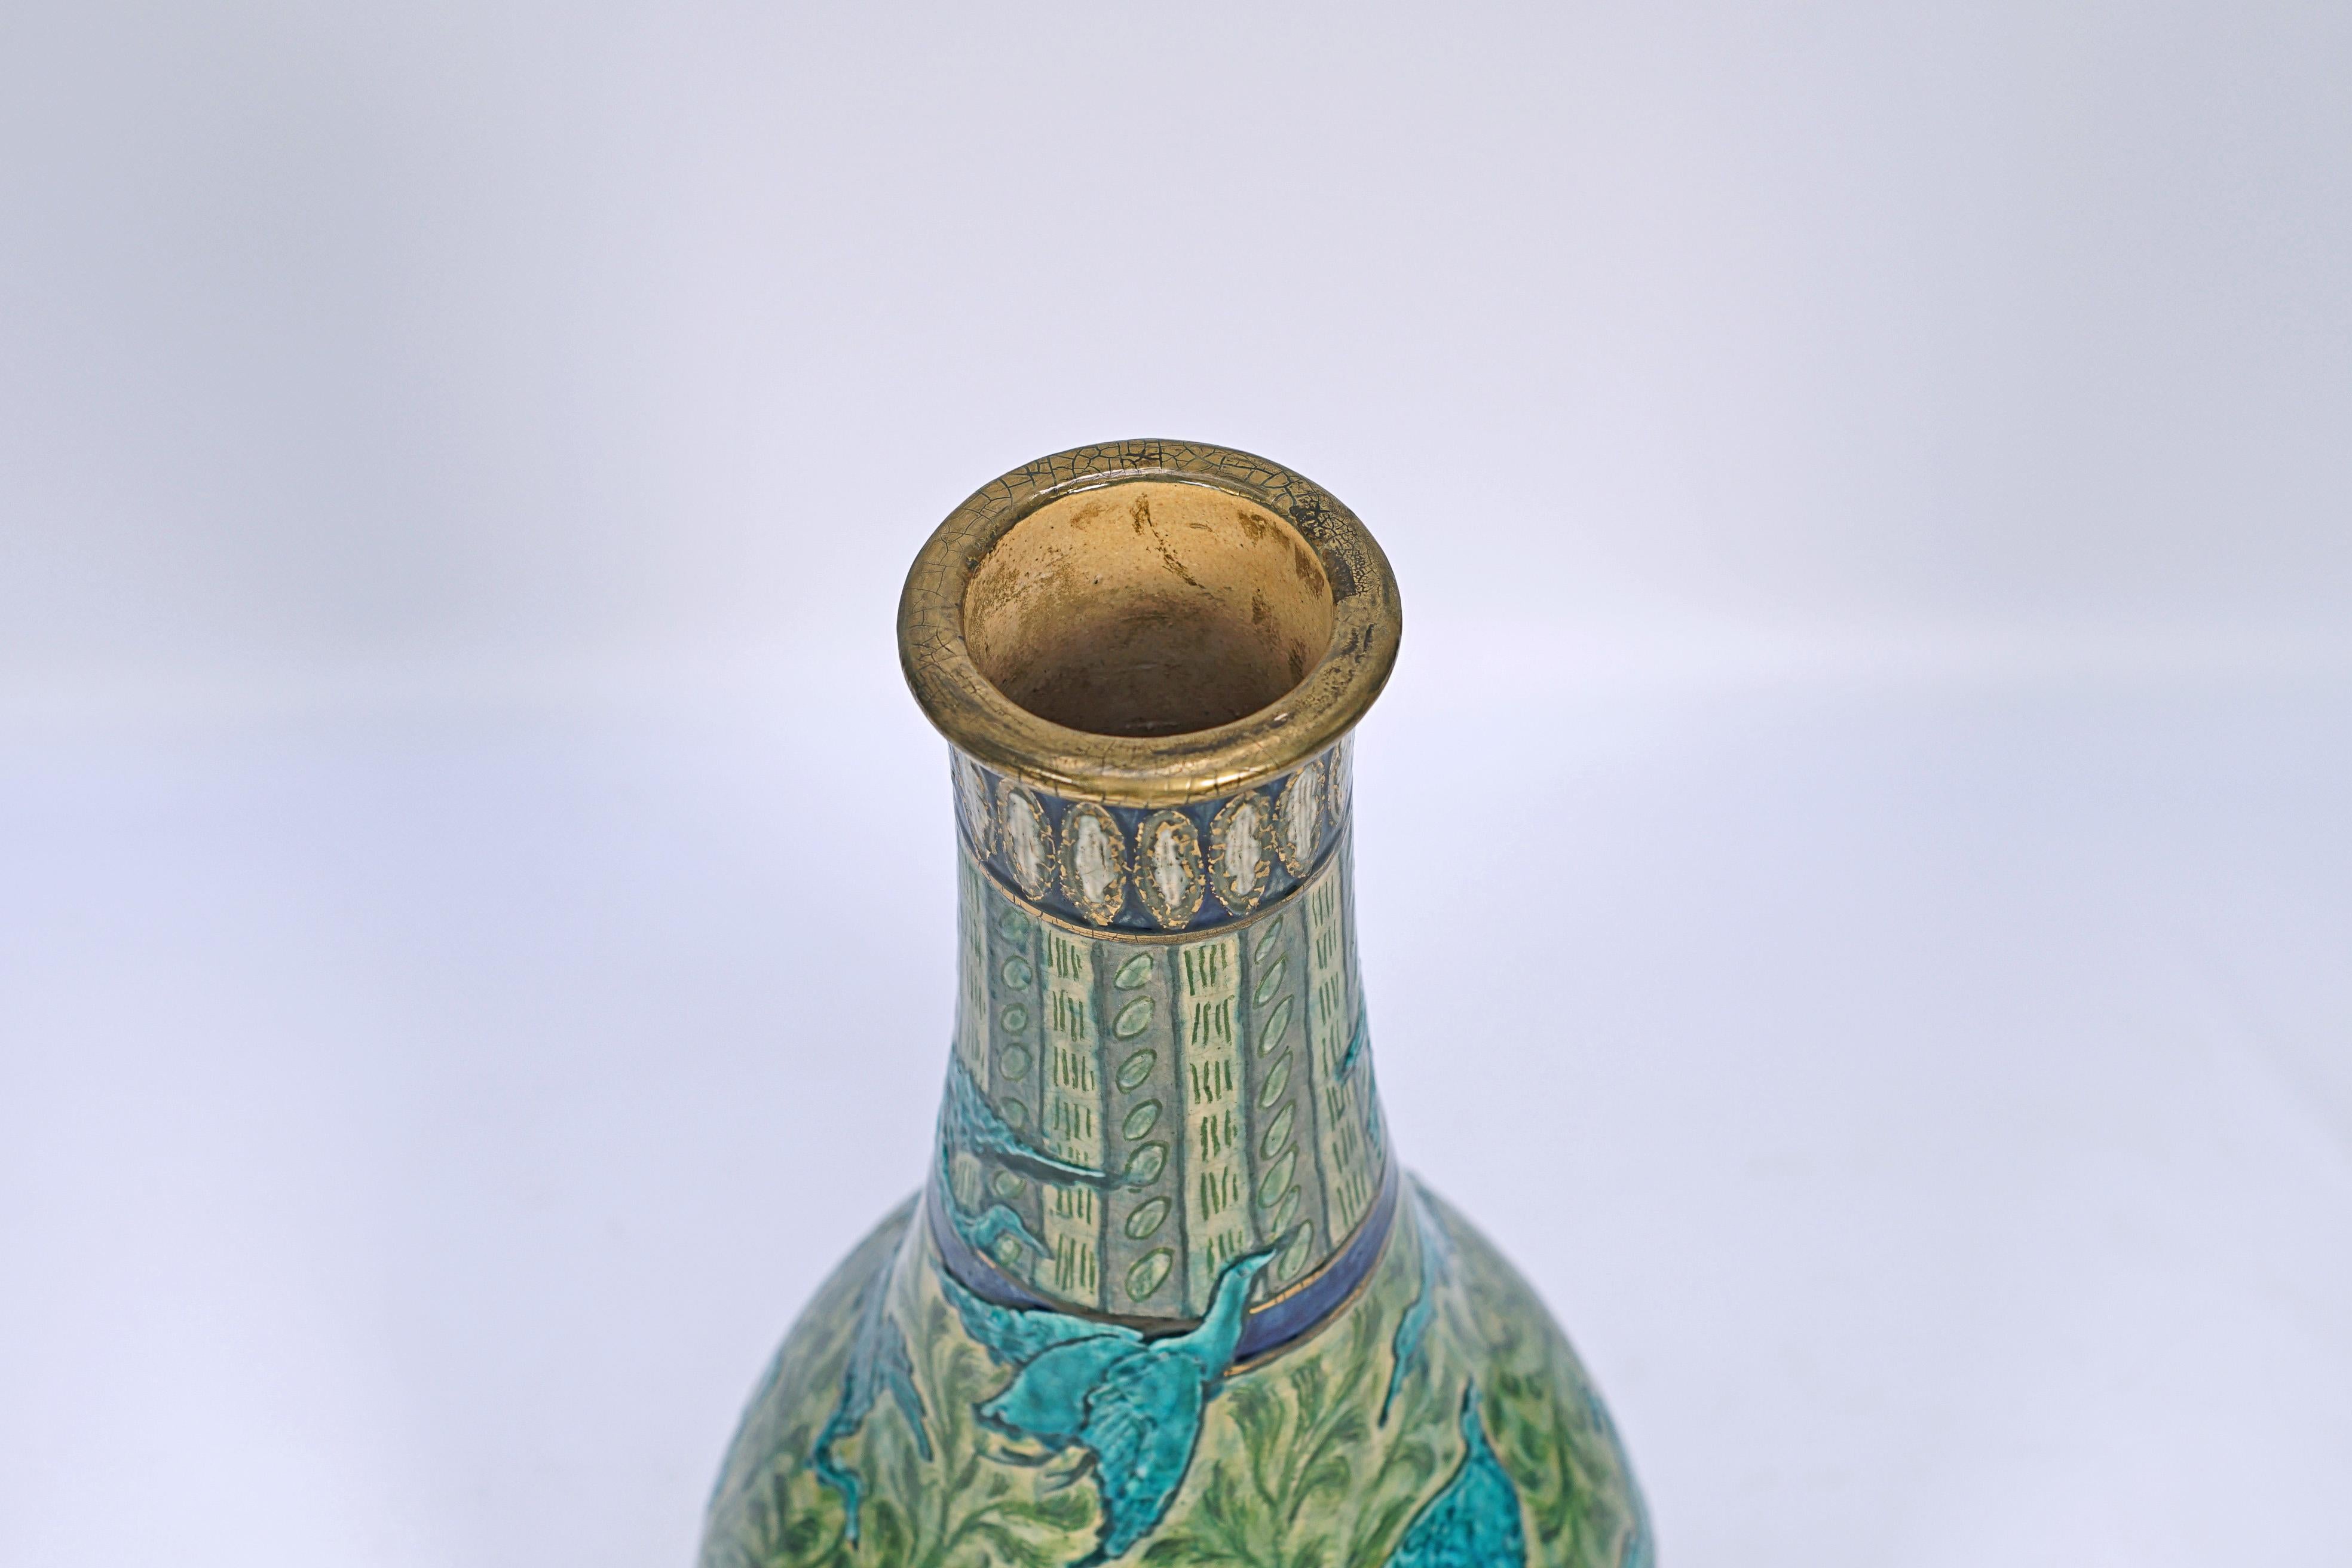 Hand-decorated ceramic with gilt reflections, monogrammed, signed and with inventory paper labels, by André Methey (1871-1920).

France, circa 1910.